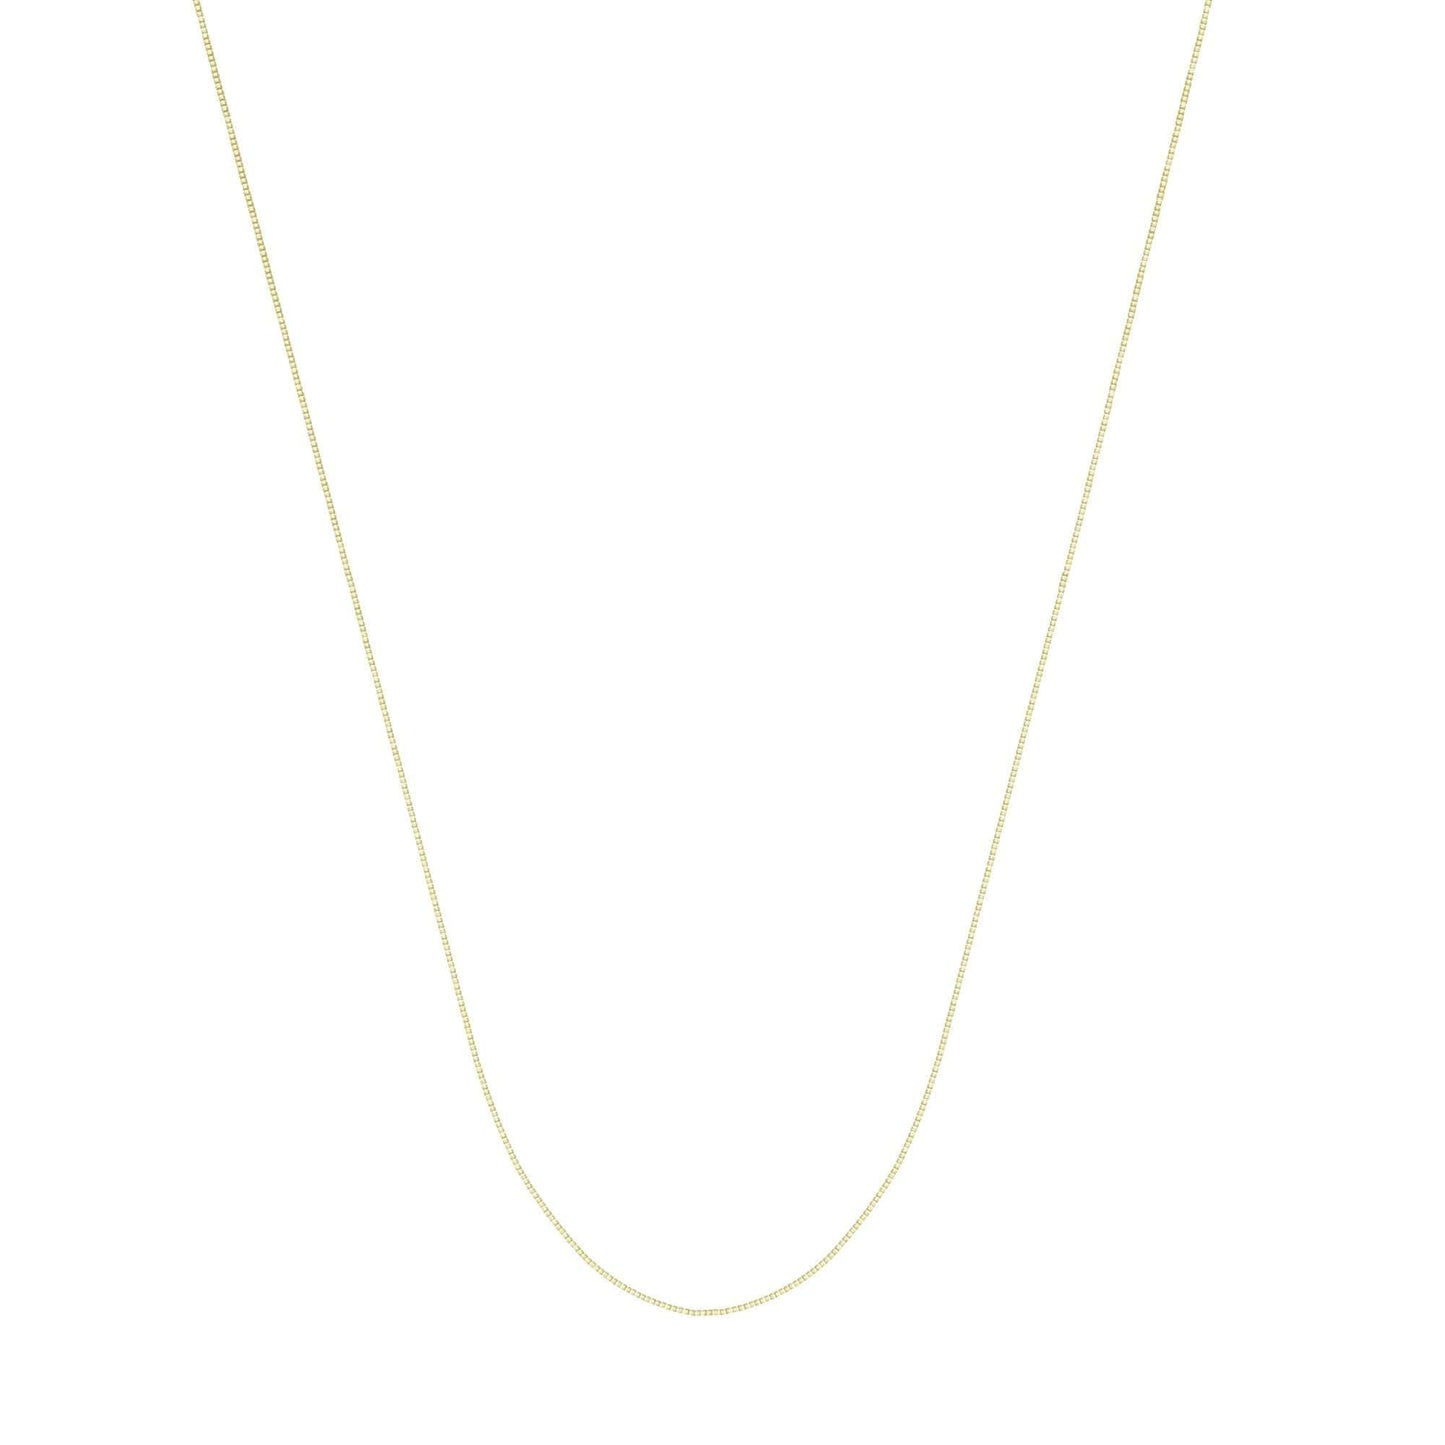 Chain 14K Gold 0.55mm Box Chain with Lobster Claw Clasp